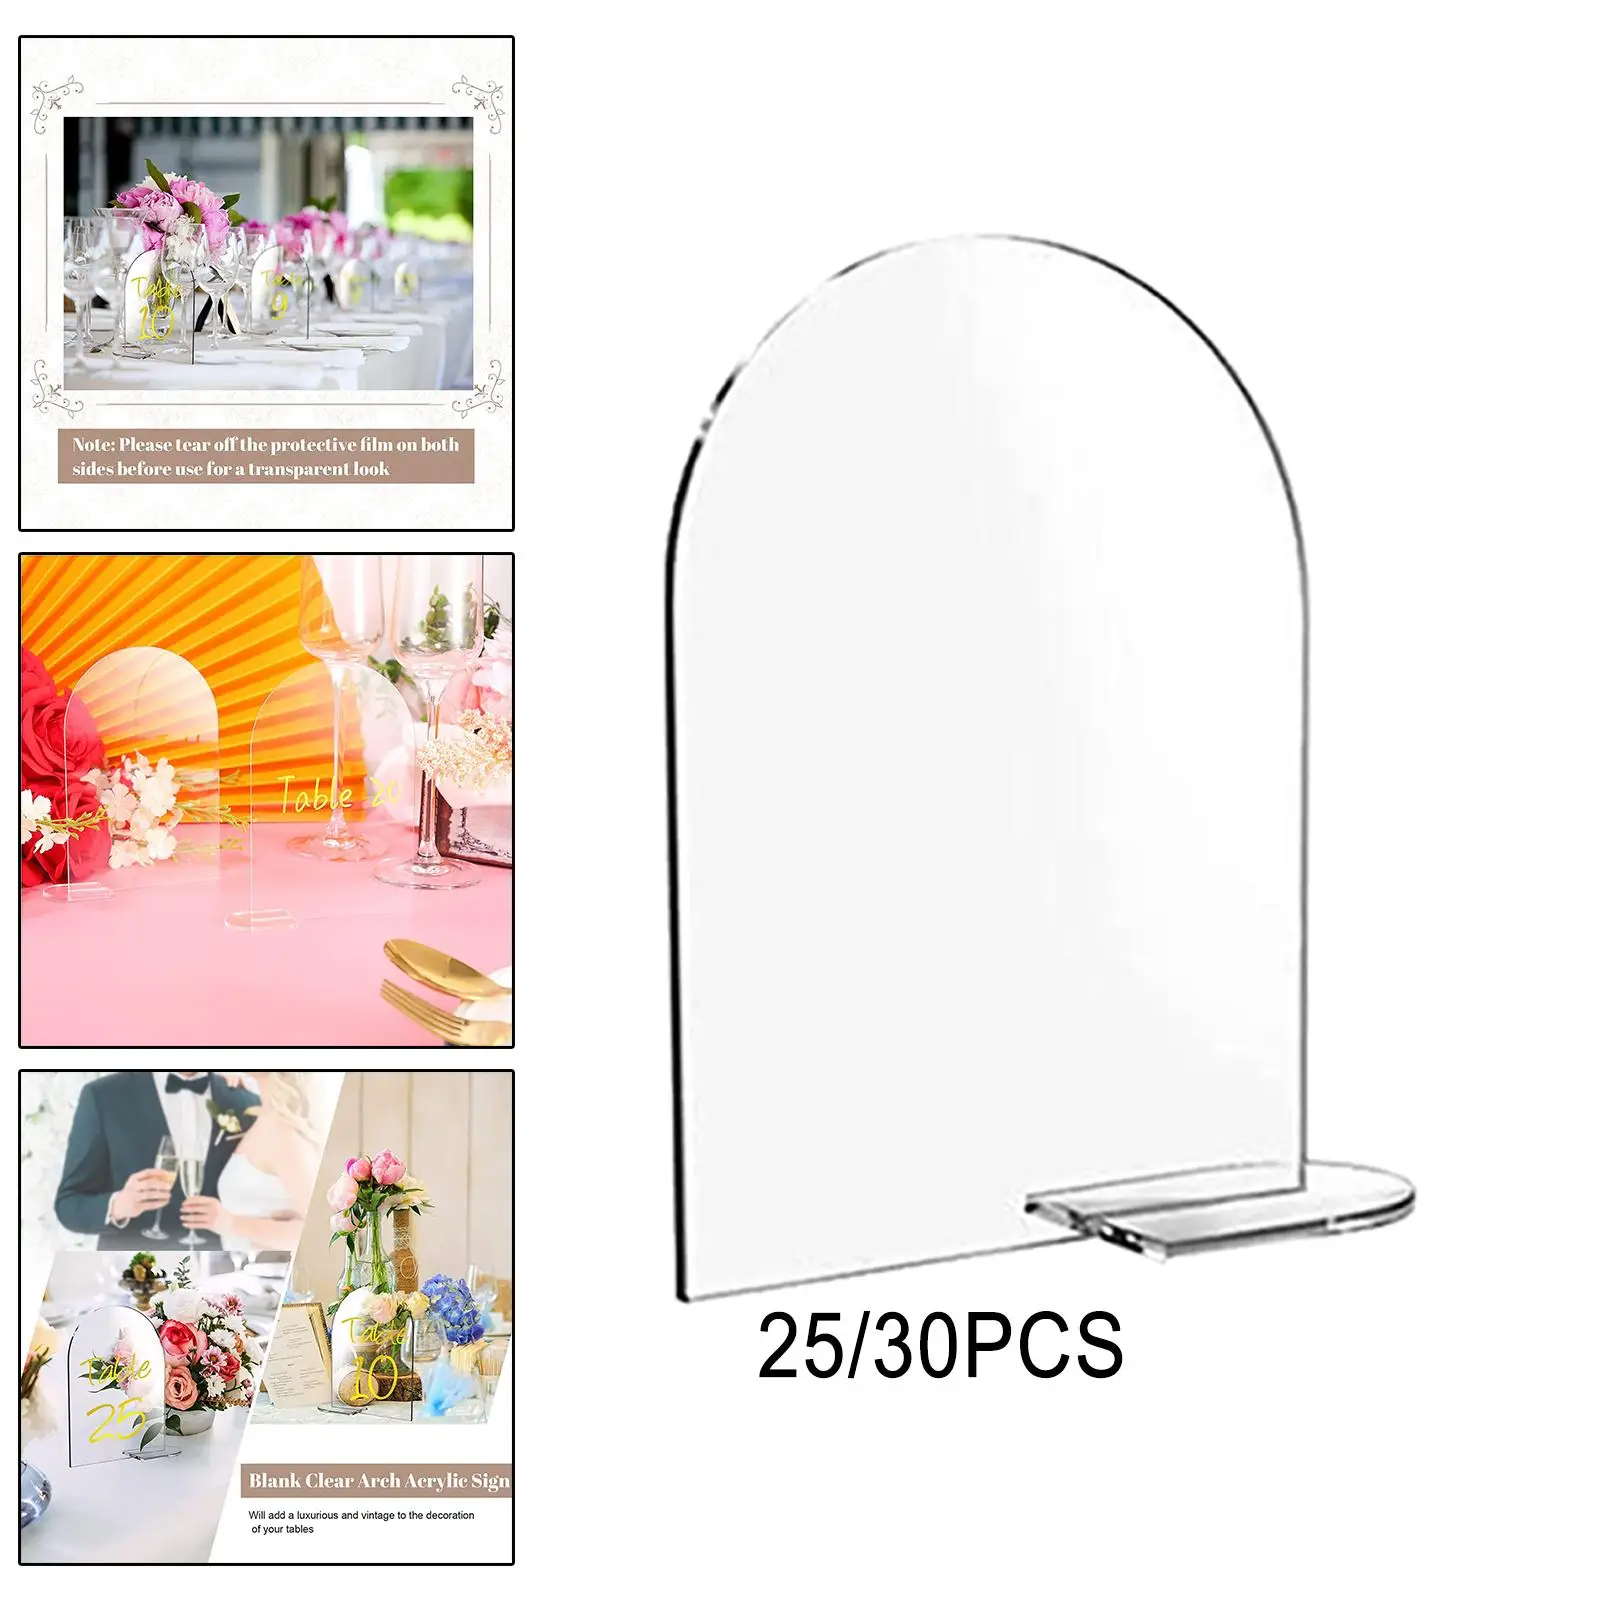 Blank Acrylic Signs Holder with Stand Double Sided Display Arched Round Top Acrylic Signs for Wedding Reception Buffet Office